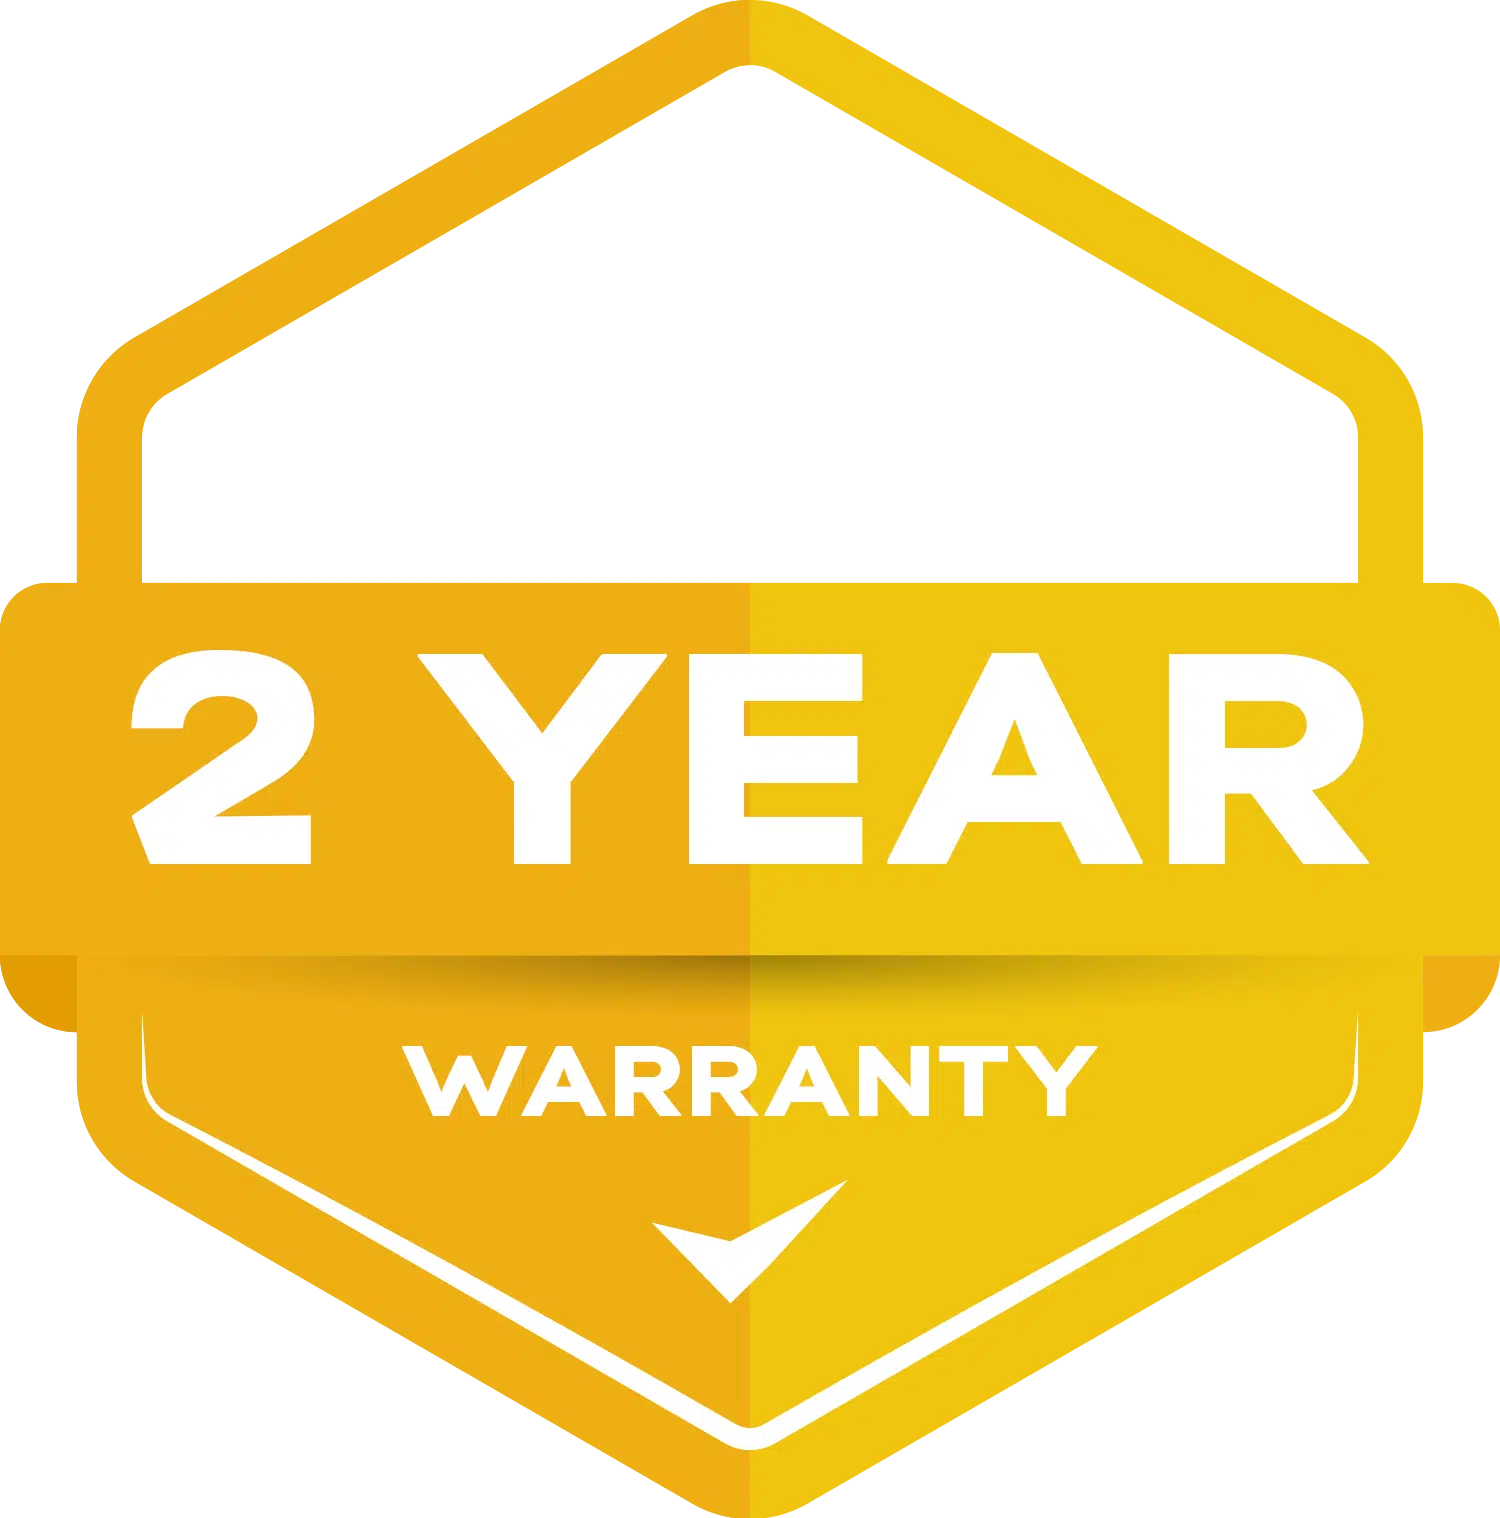 Extended Warranty 2 Year – P1000